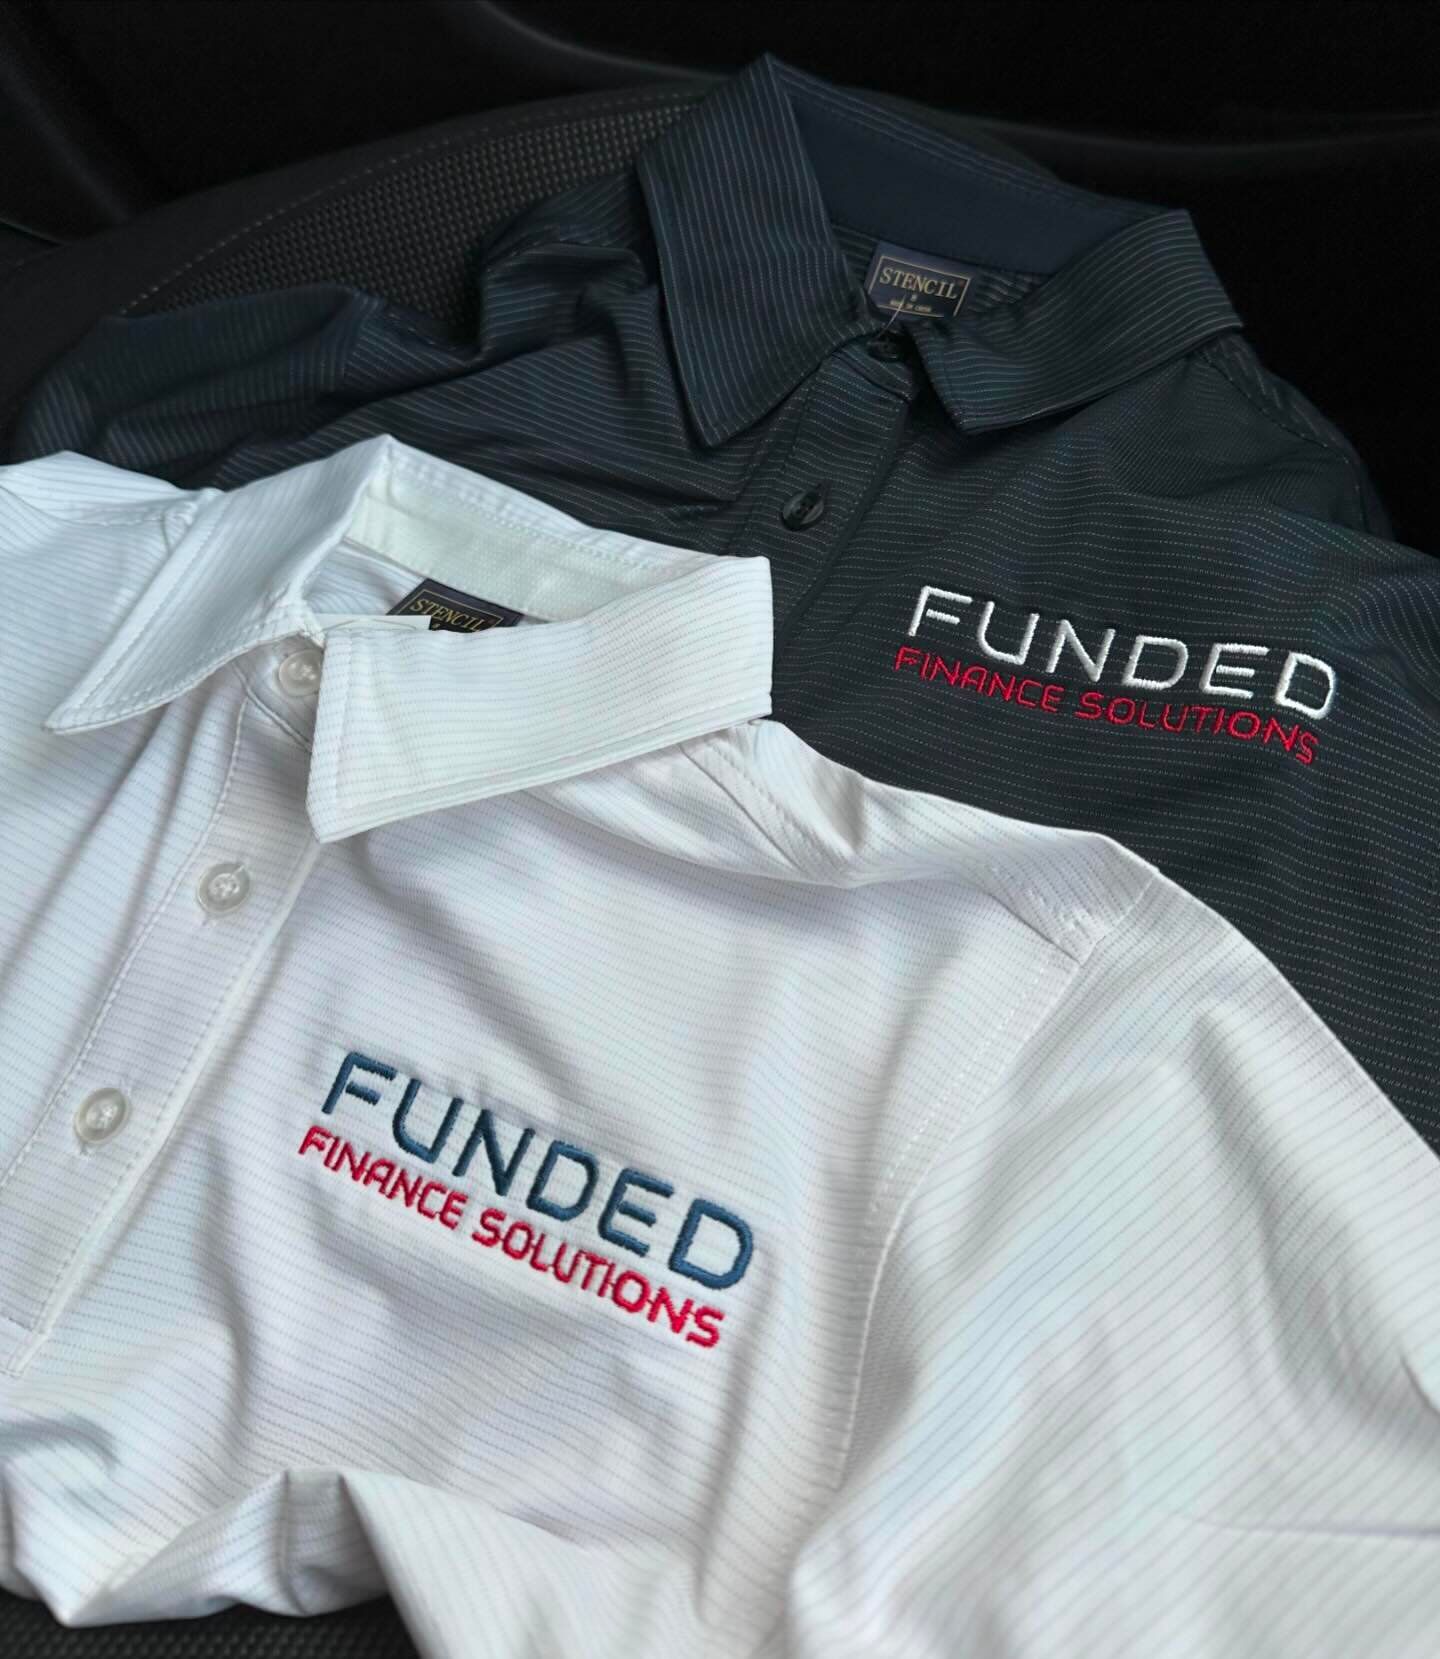 Funded Finance Embroidered shirts